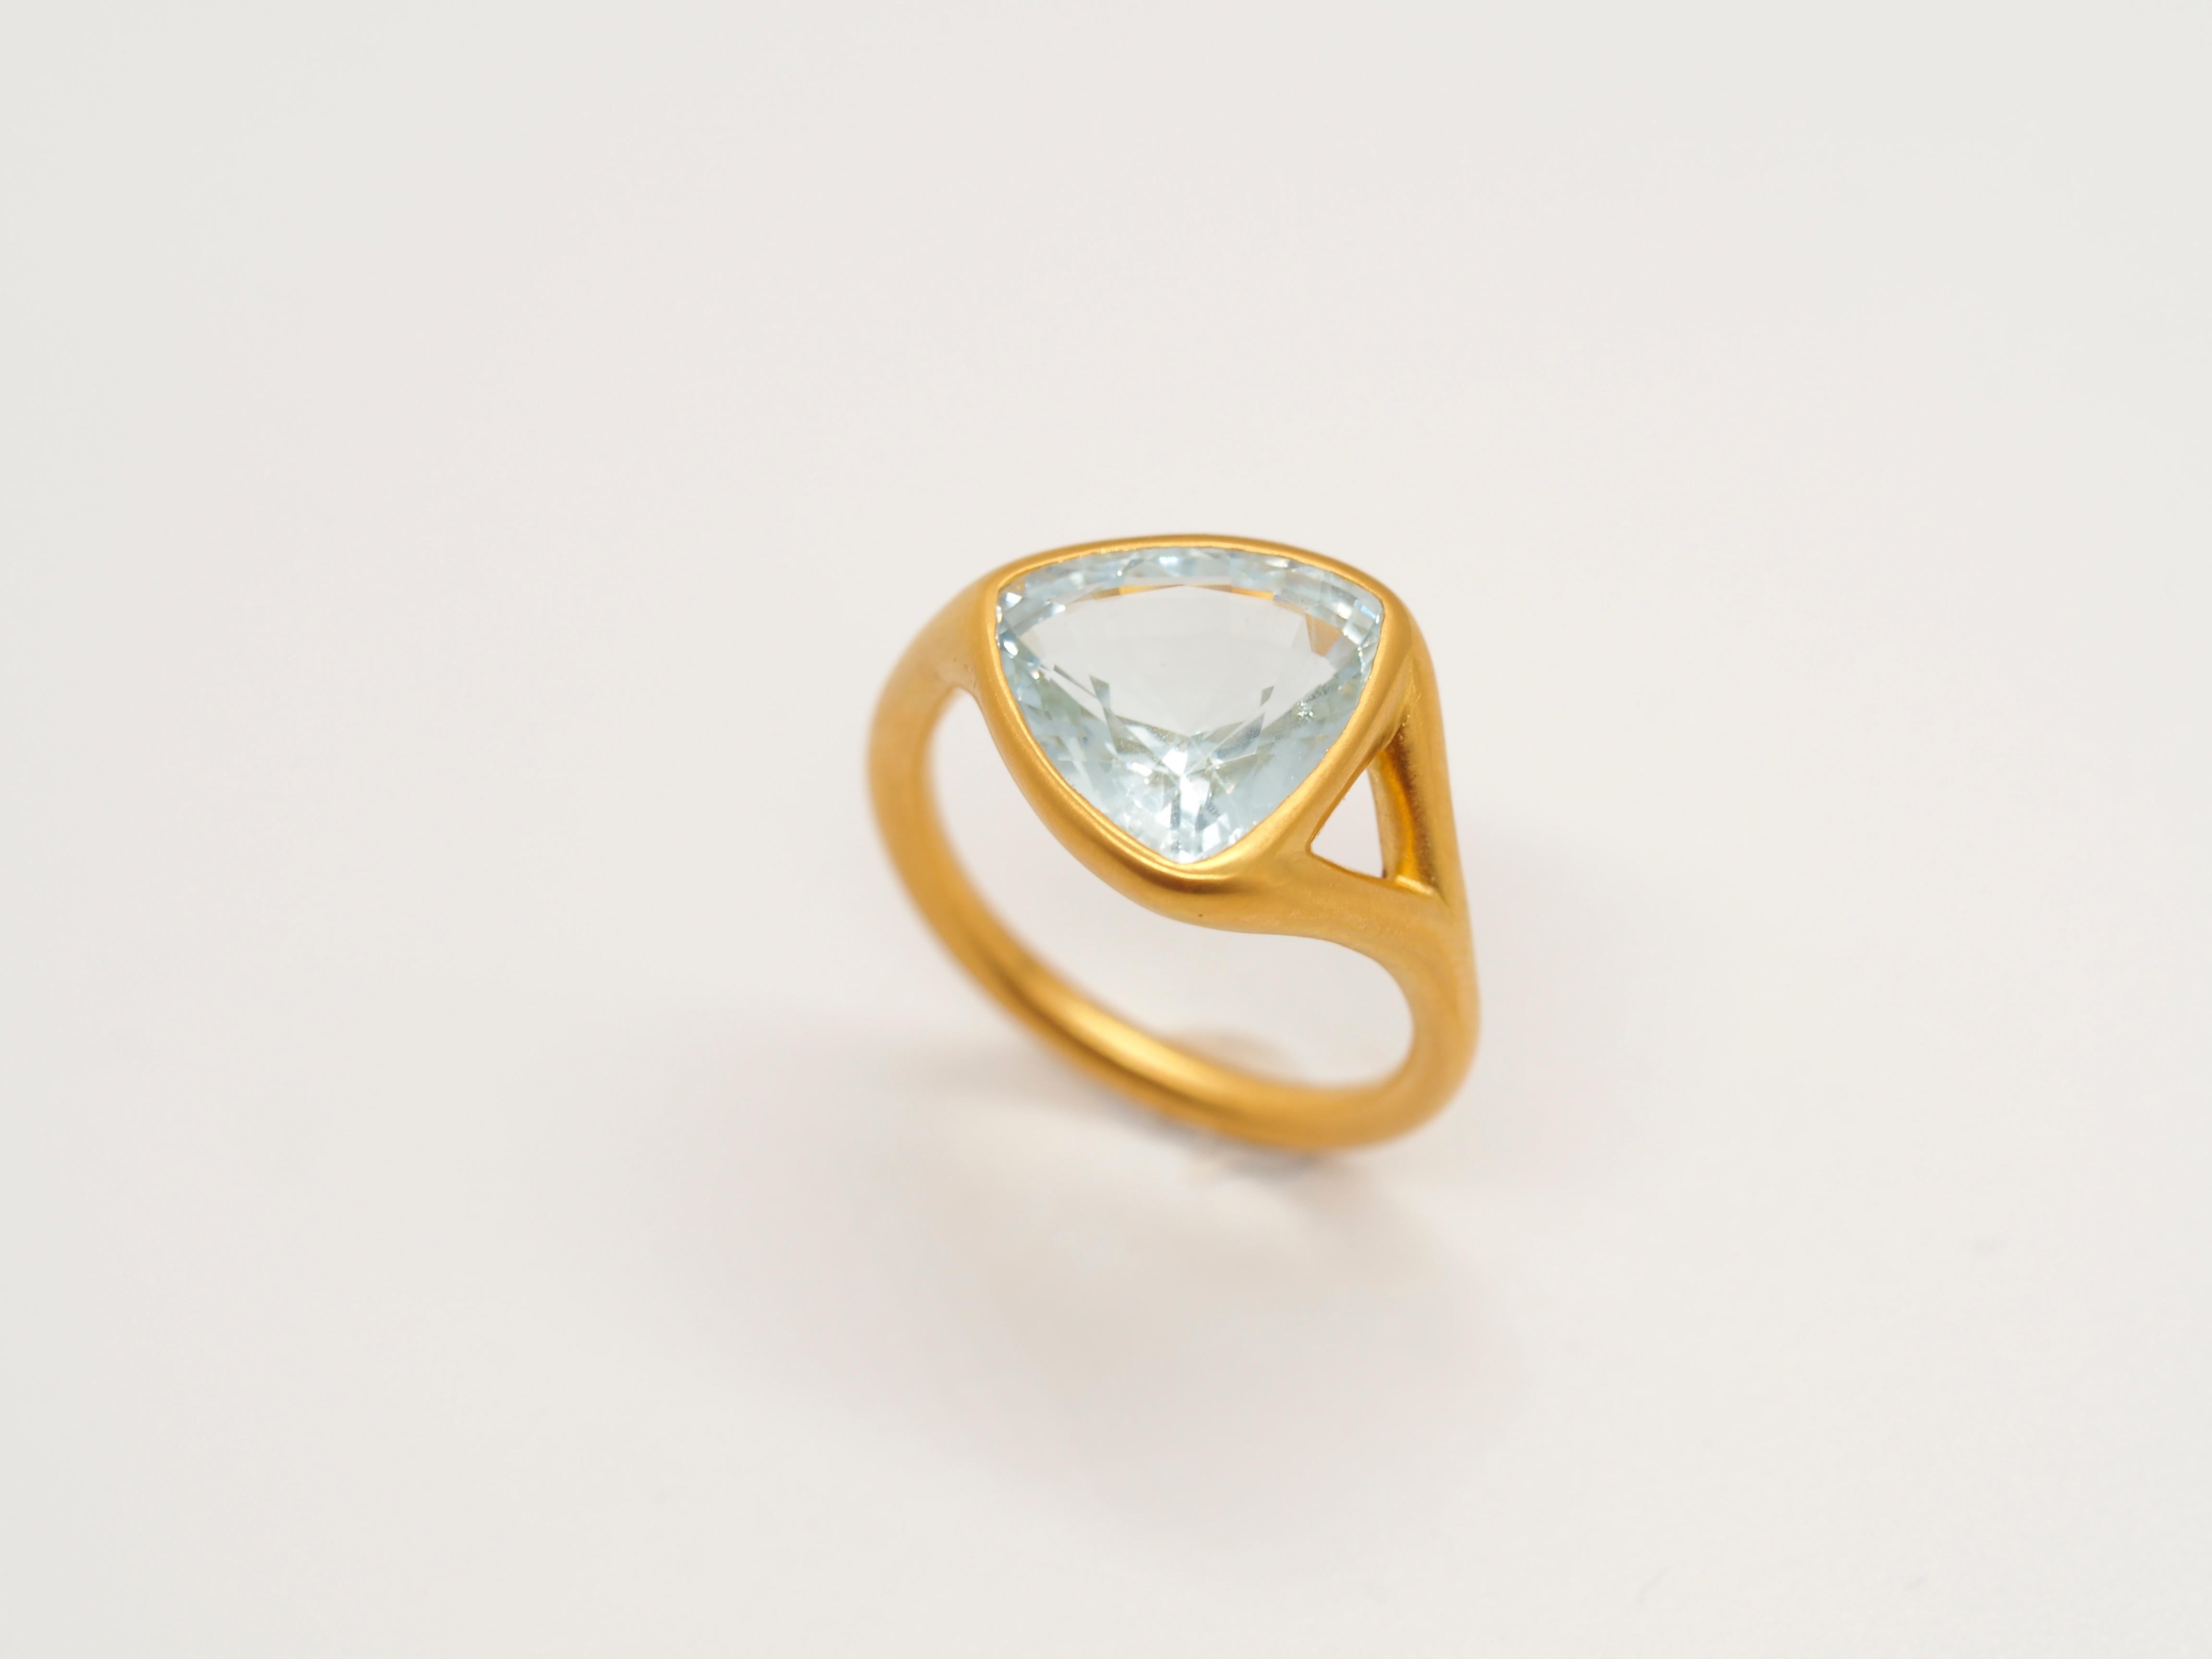 This modern & elegant ring by Scrives highlights a trillion shape aquamarine set in 22kt gold. The aquamarine of 4.6cts touches directly the finger. 
The aquamarine comes from Myanmar. It is a natural stone from the beryl family. It has a light blue